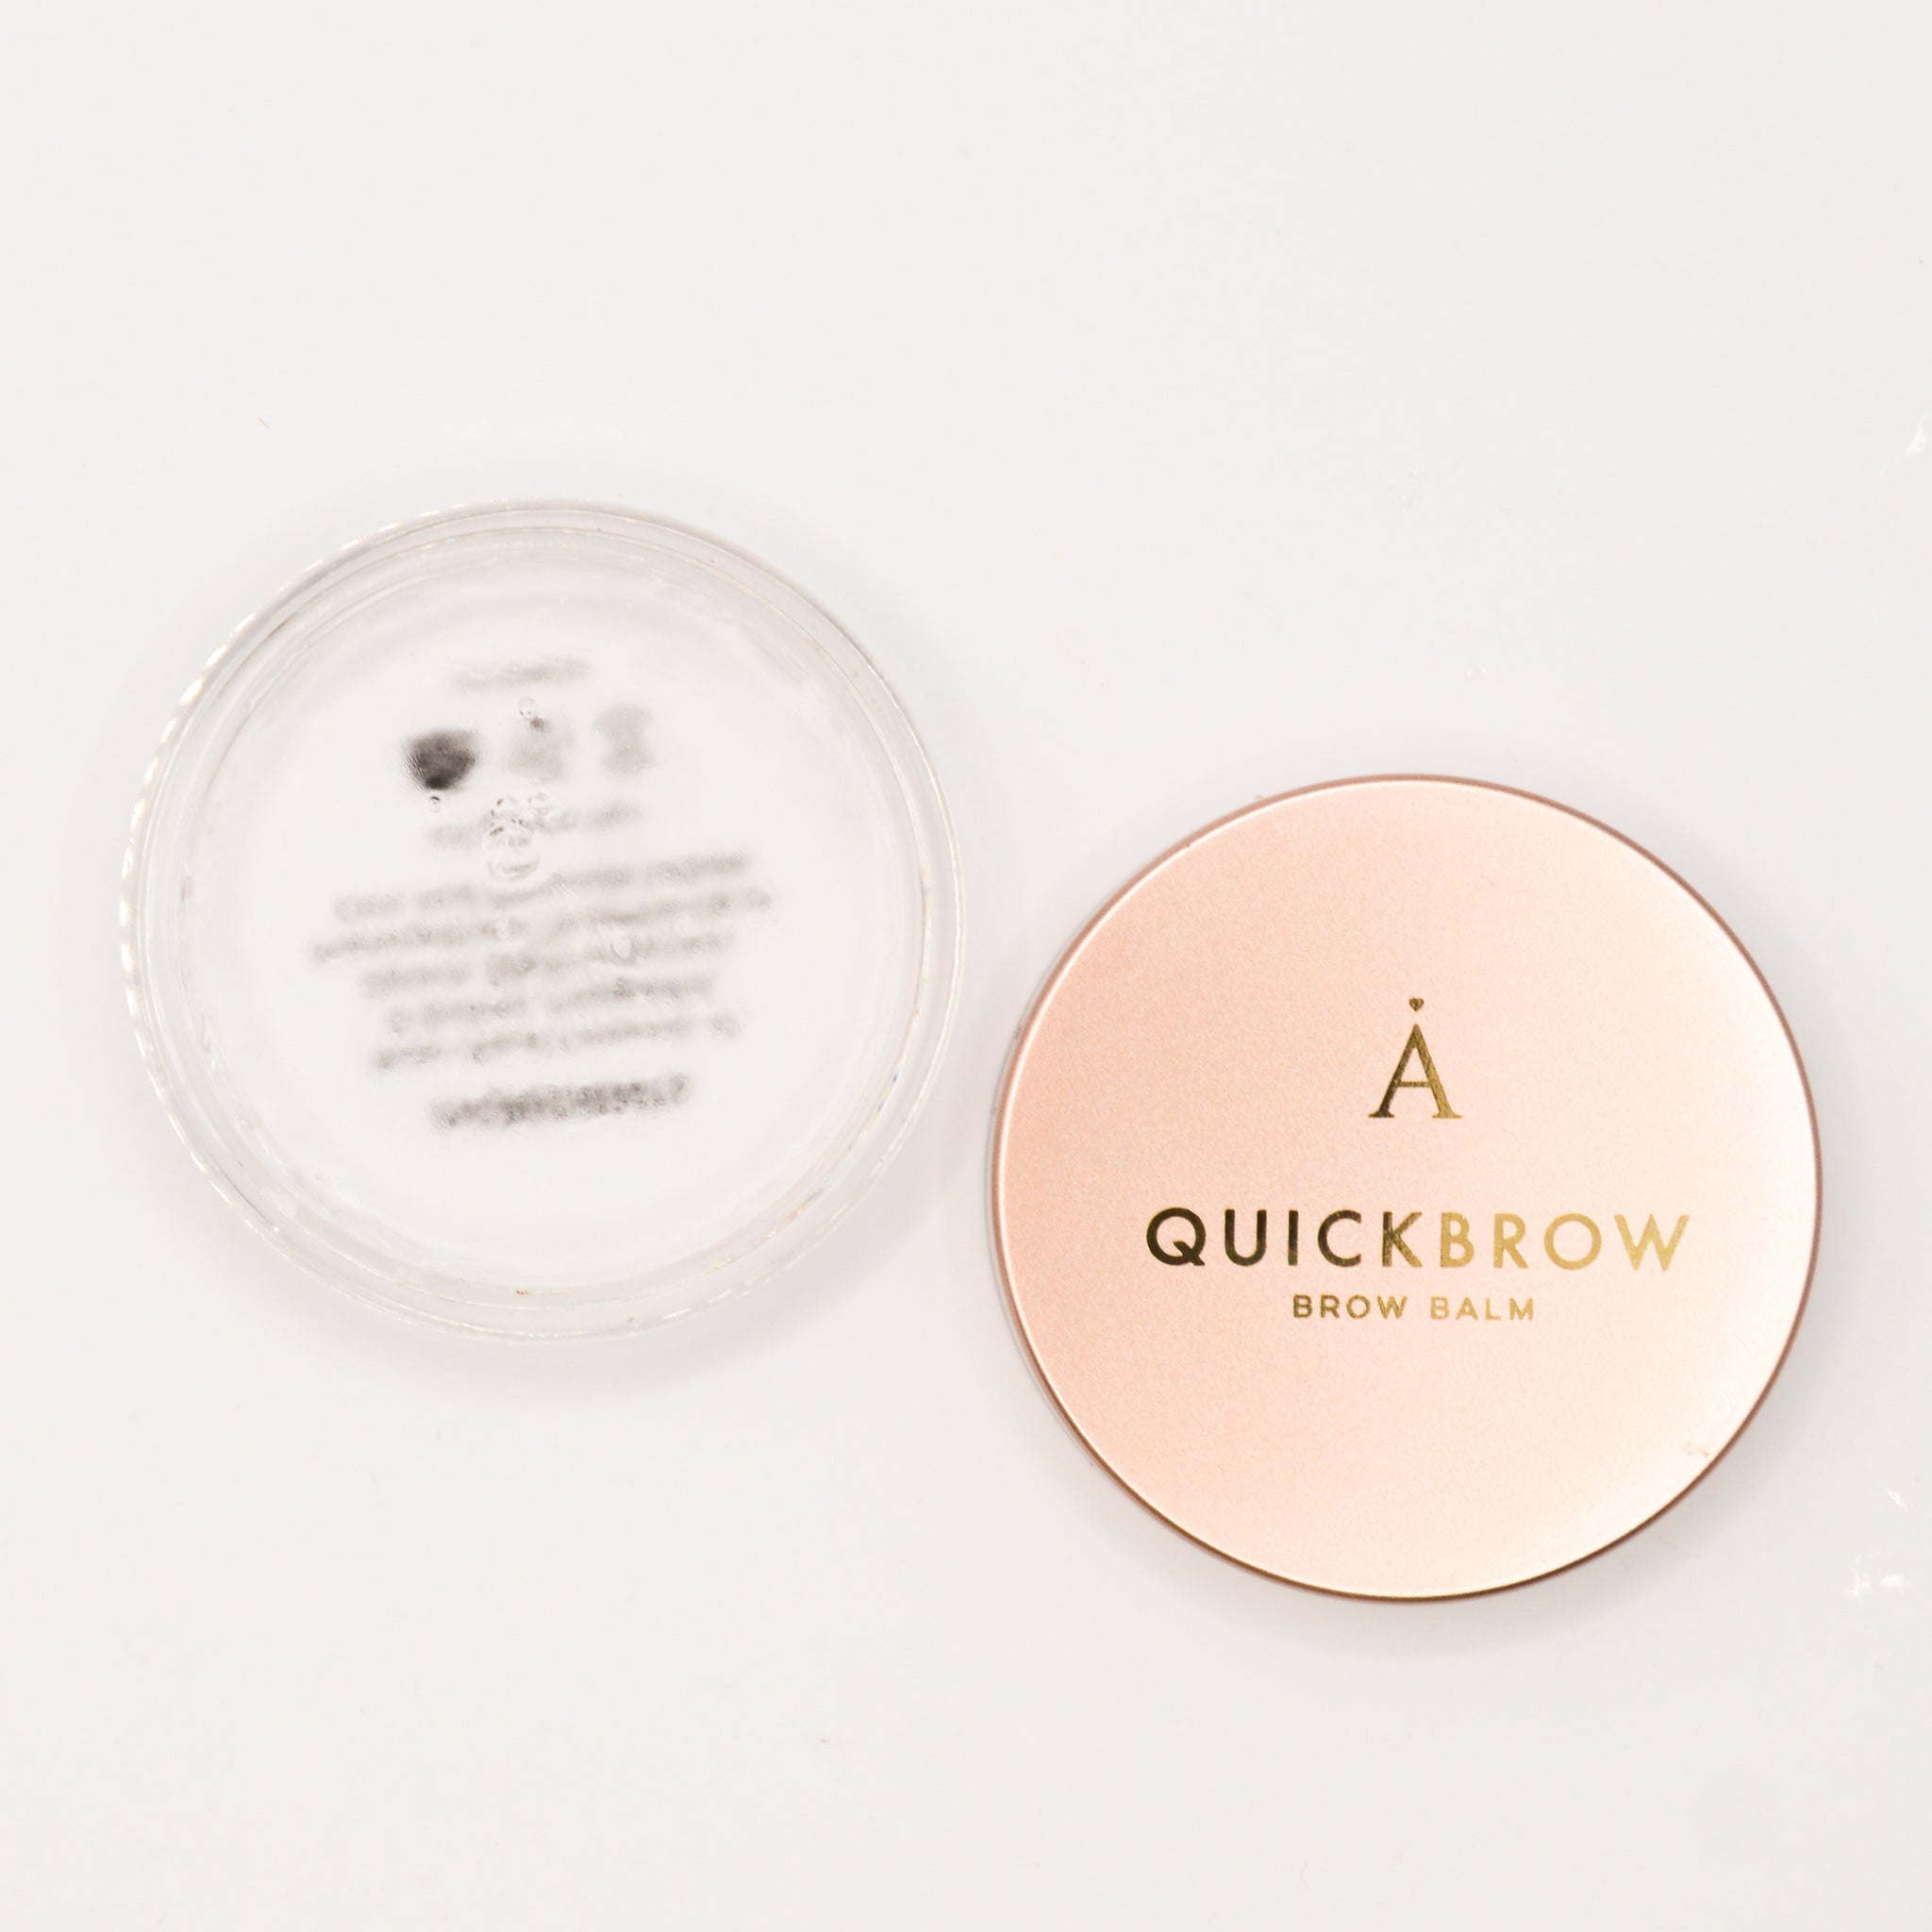 Brow Balm packaging